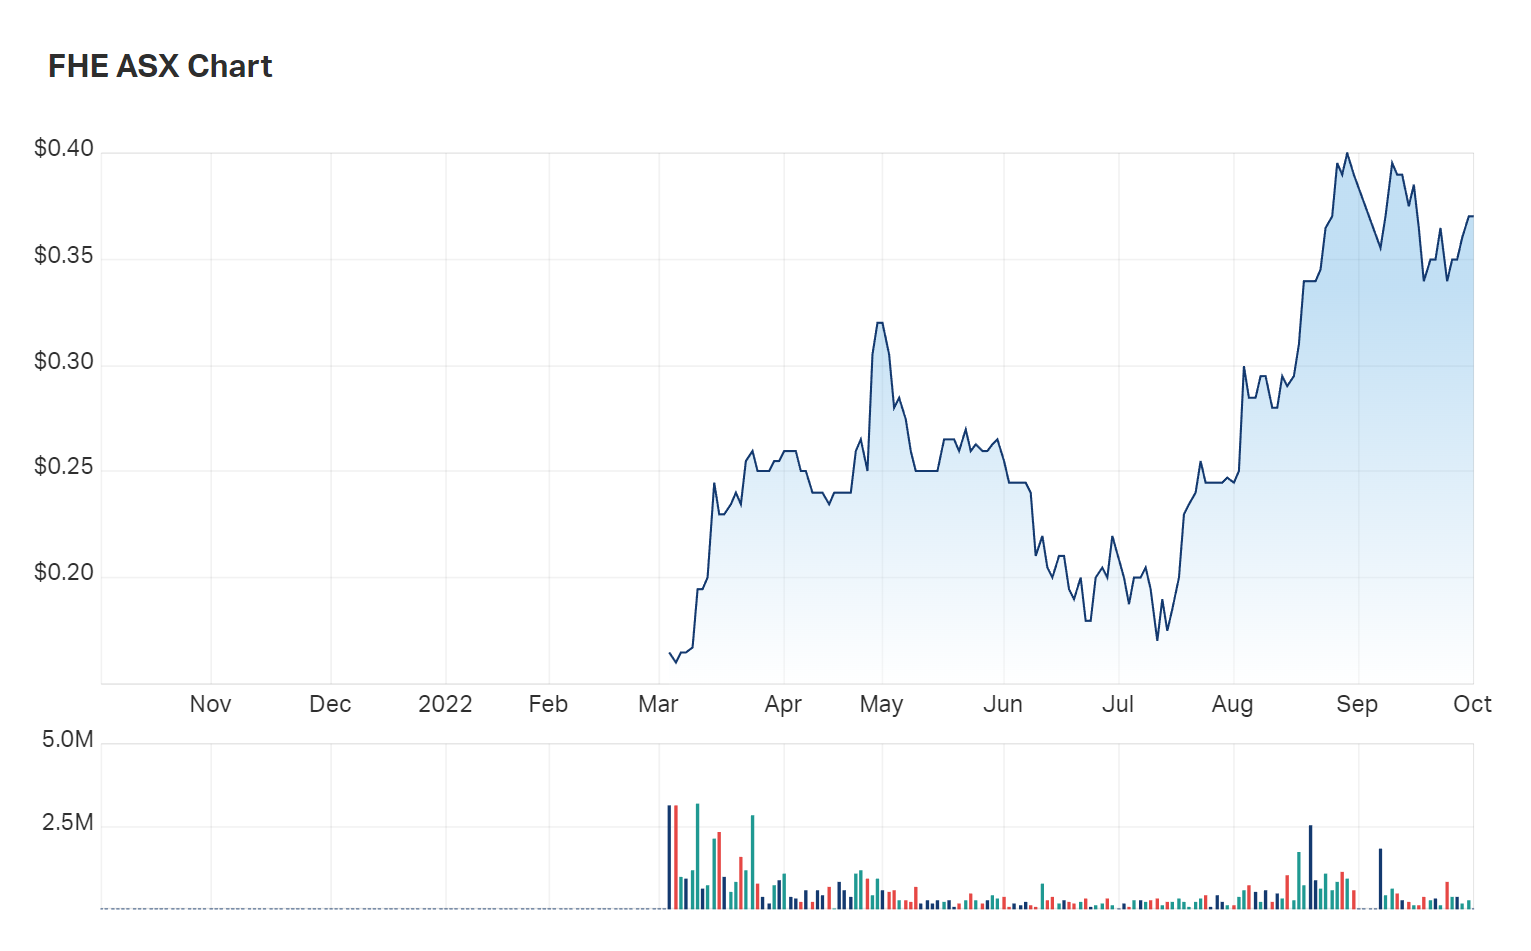 A look at Frontier's one year chart